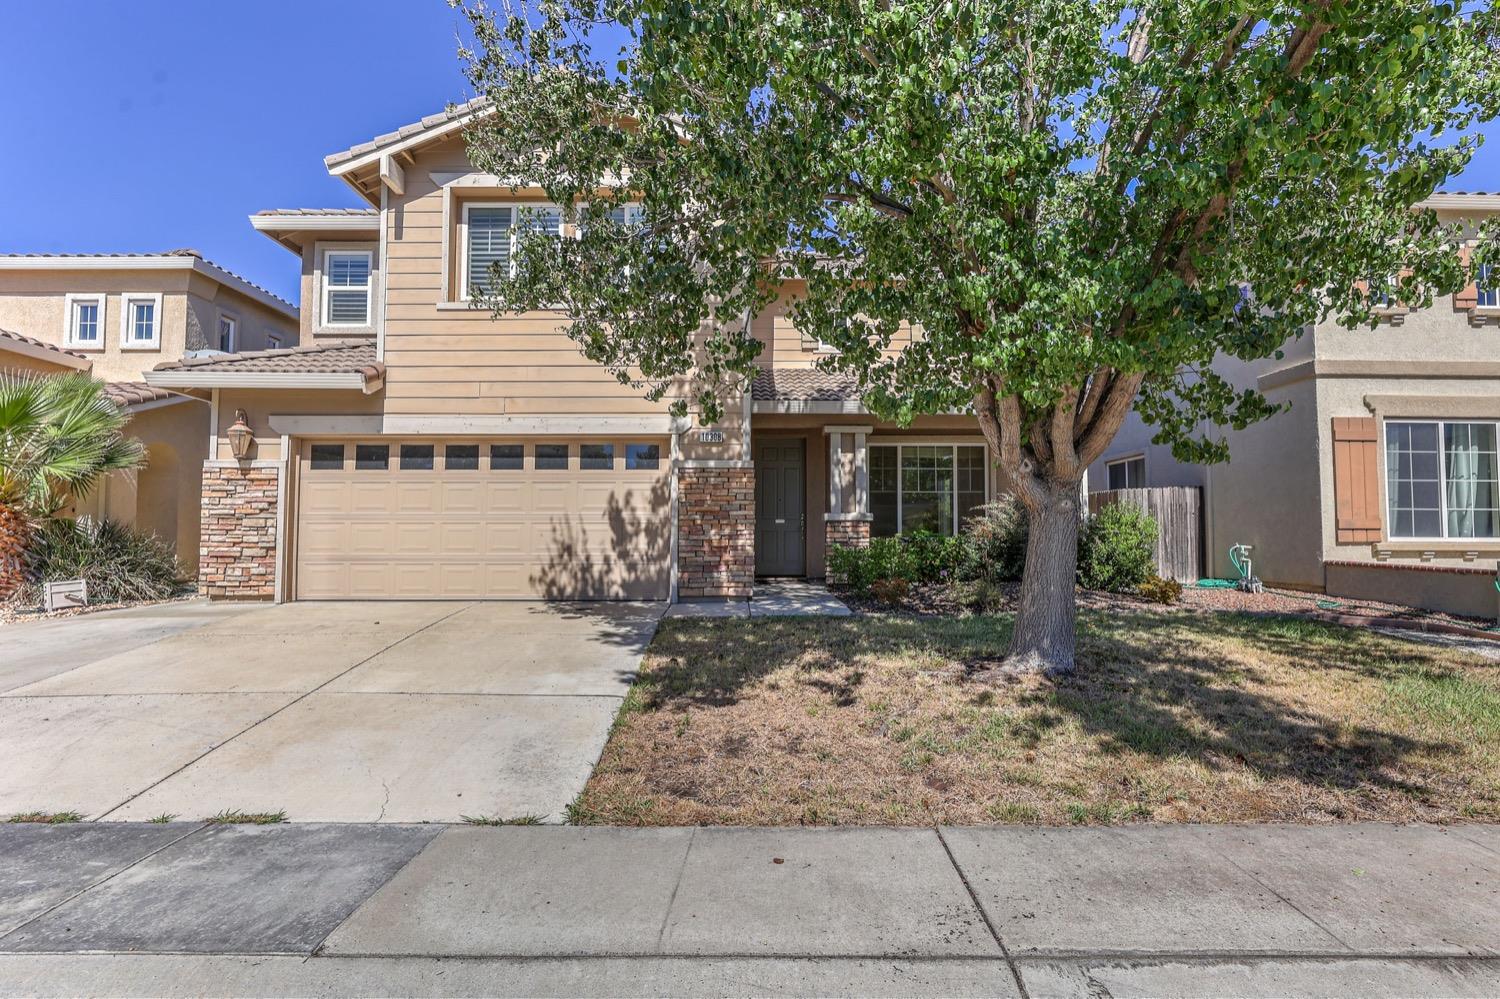 Location! Location! Location!  This beautiful Elk Grove home features 18 foot high cathedral ceiling